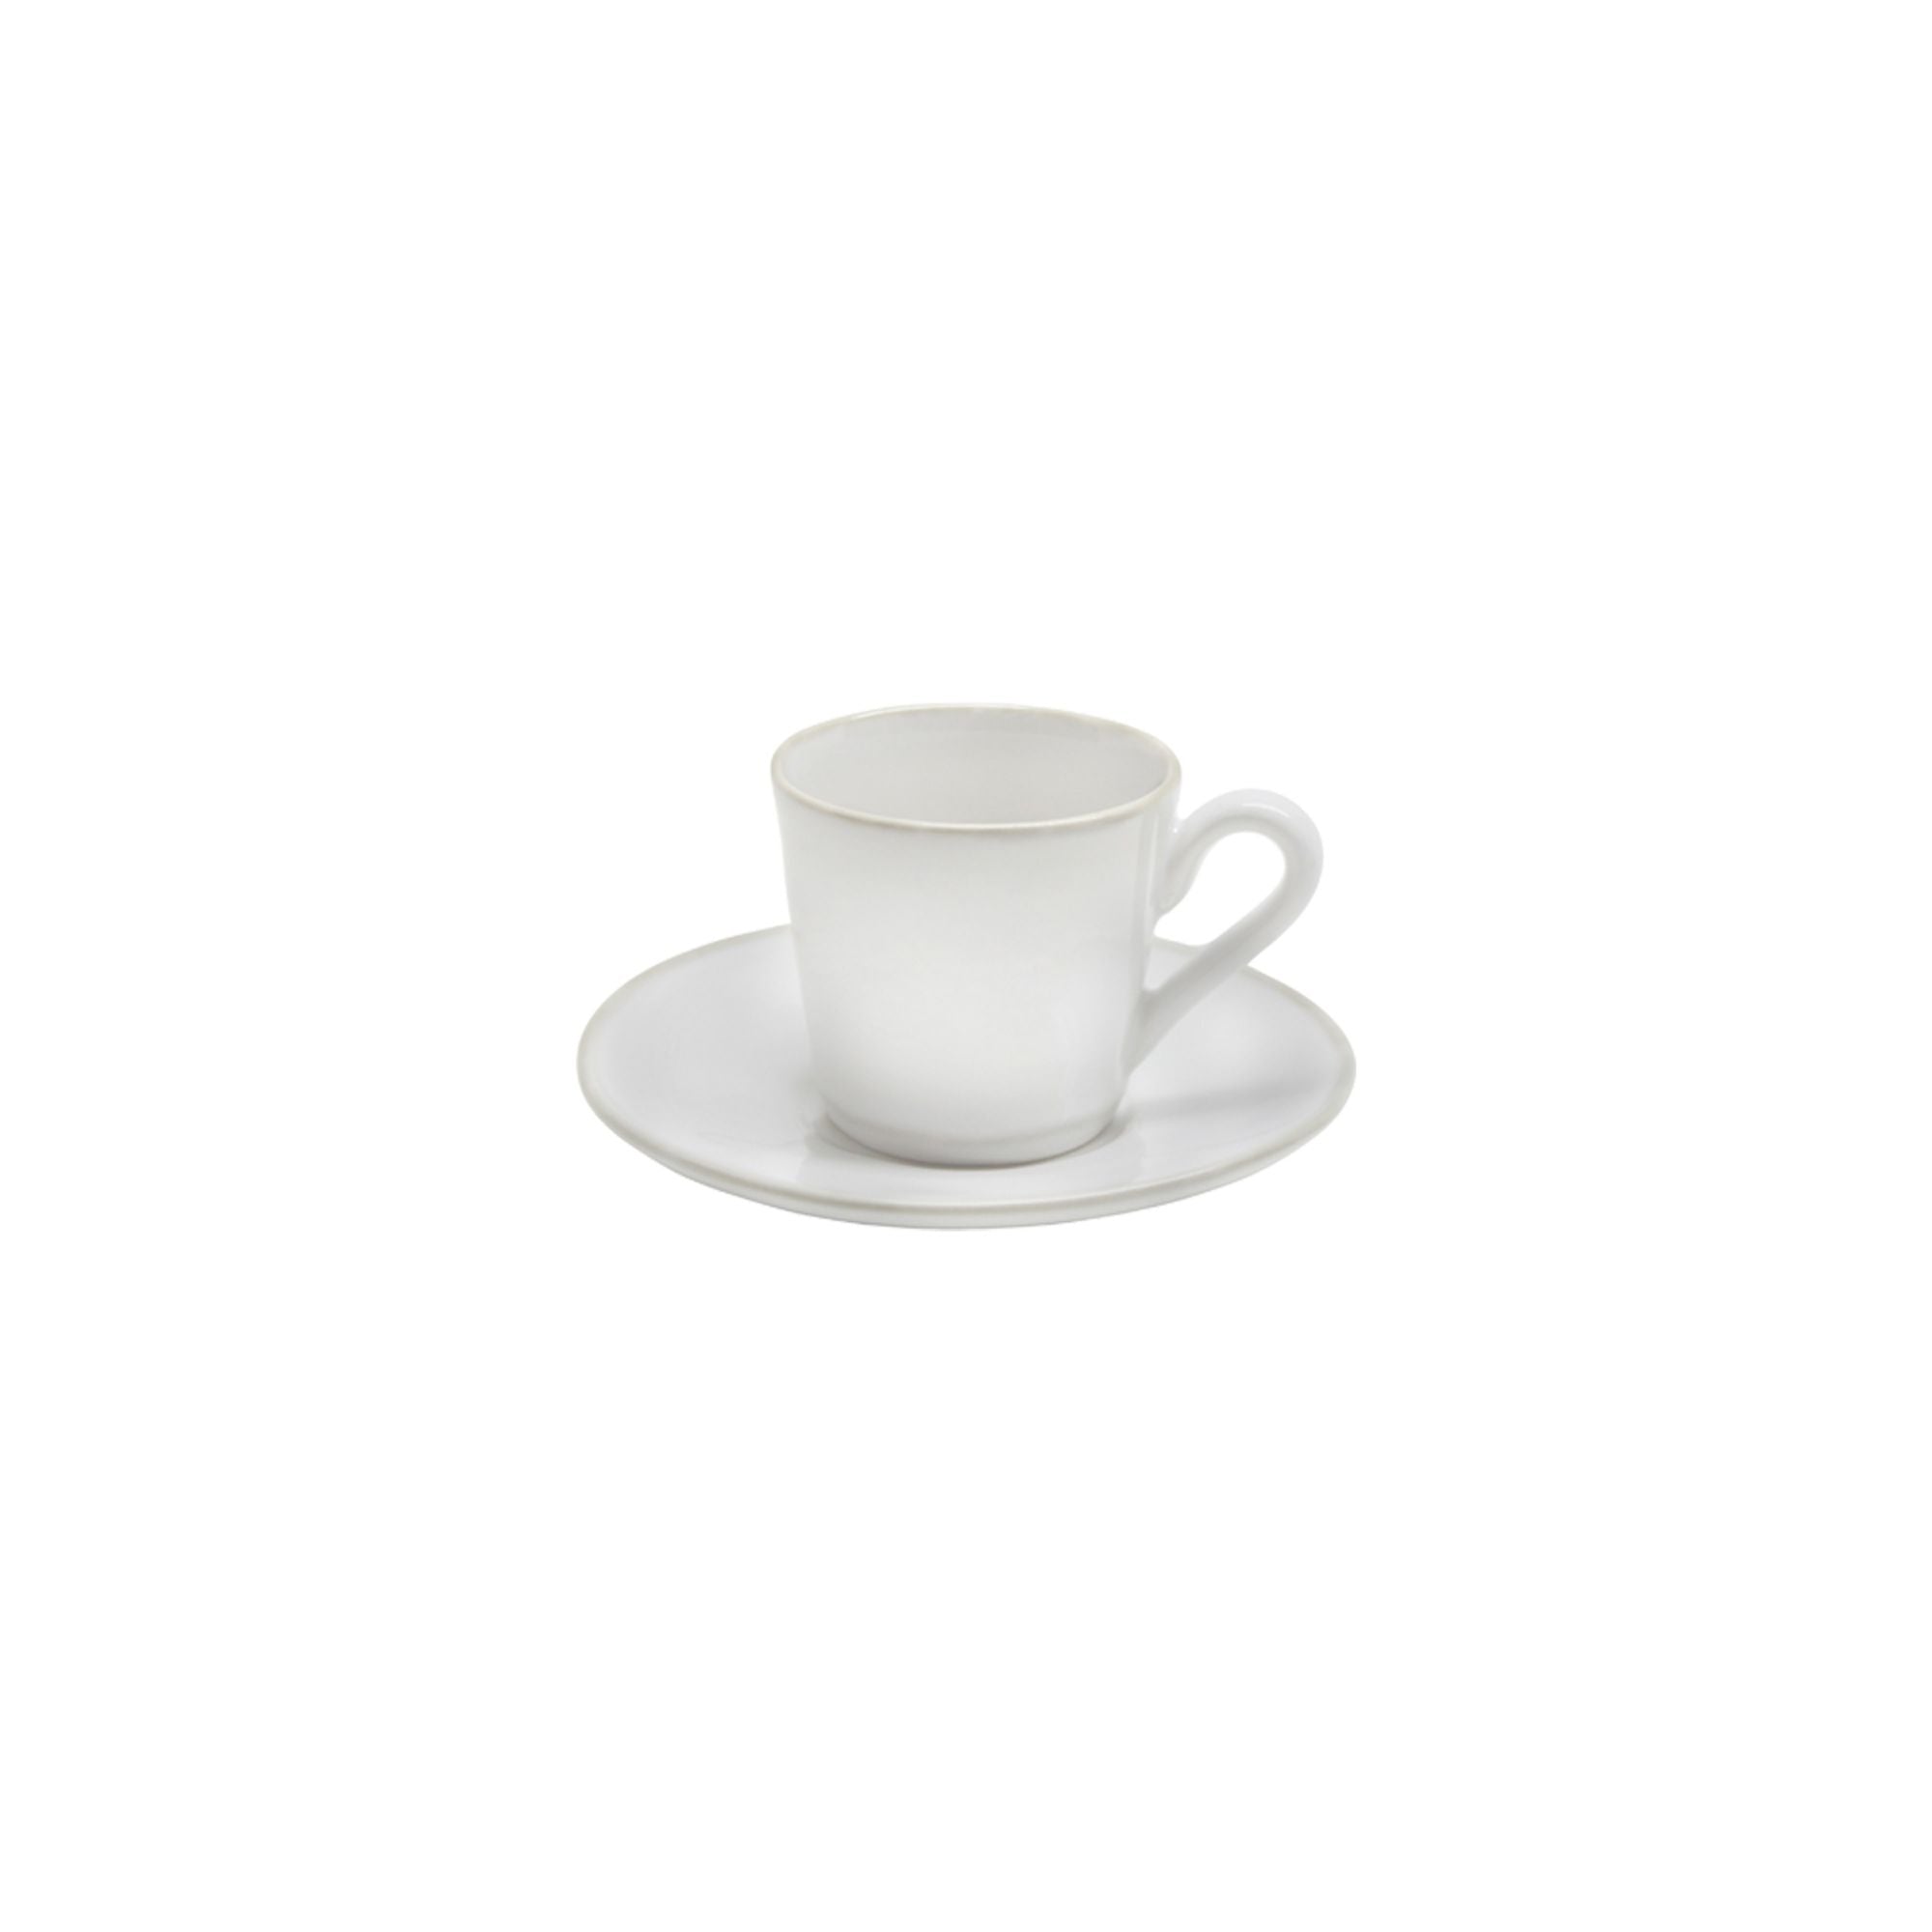 Beja Coffee Cup and Saucer 3 oz. White-Cream